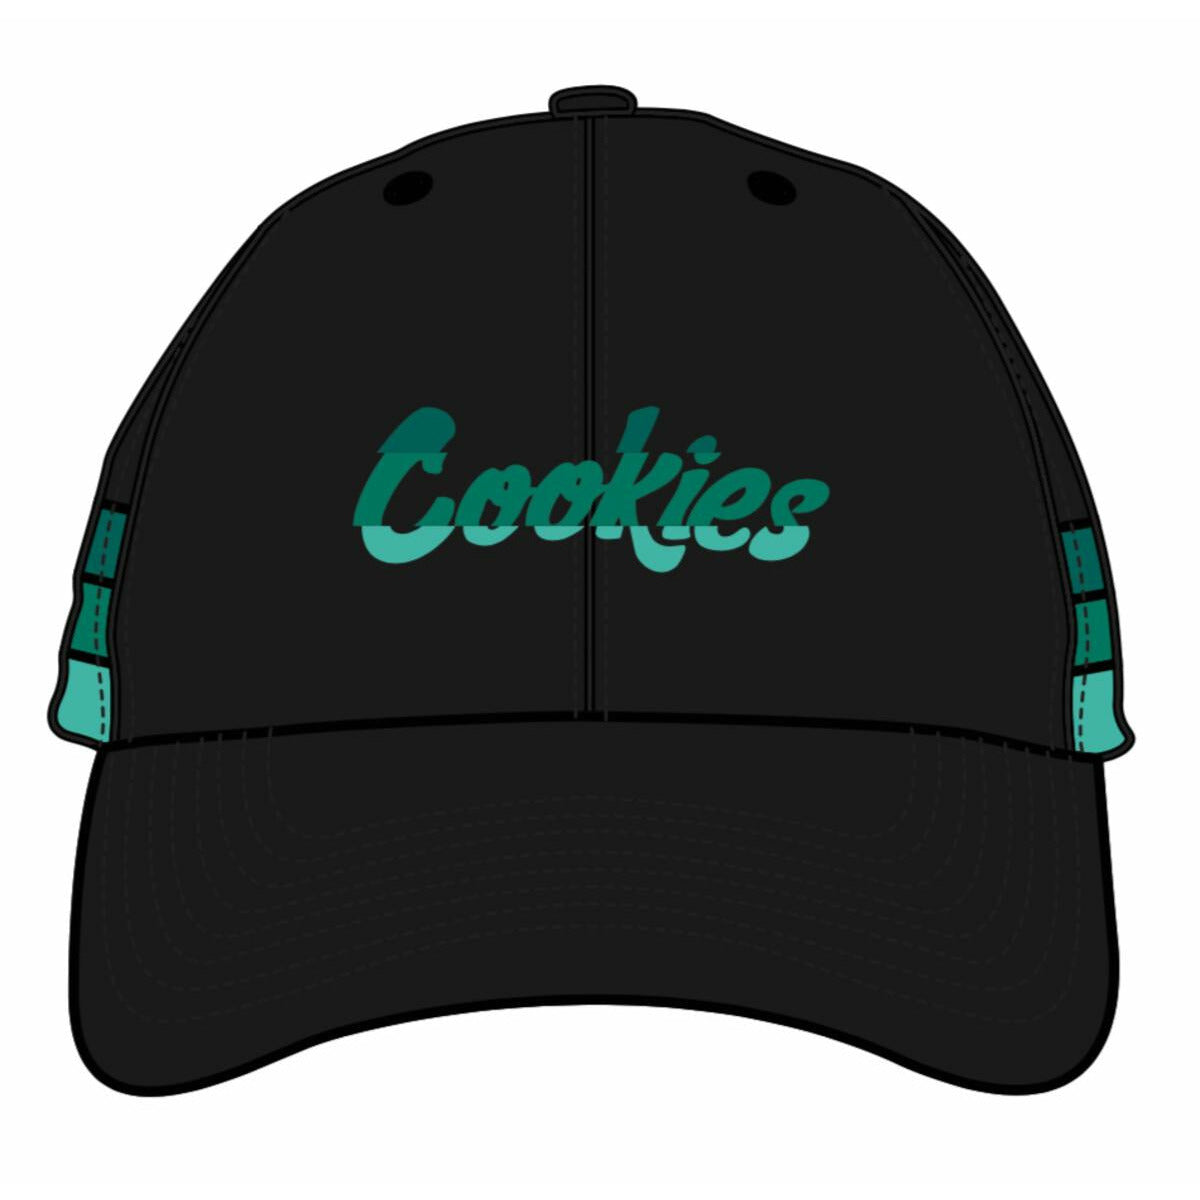 Cookies Off Shore Twill Black Snapback Cap w/Embroidery